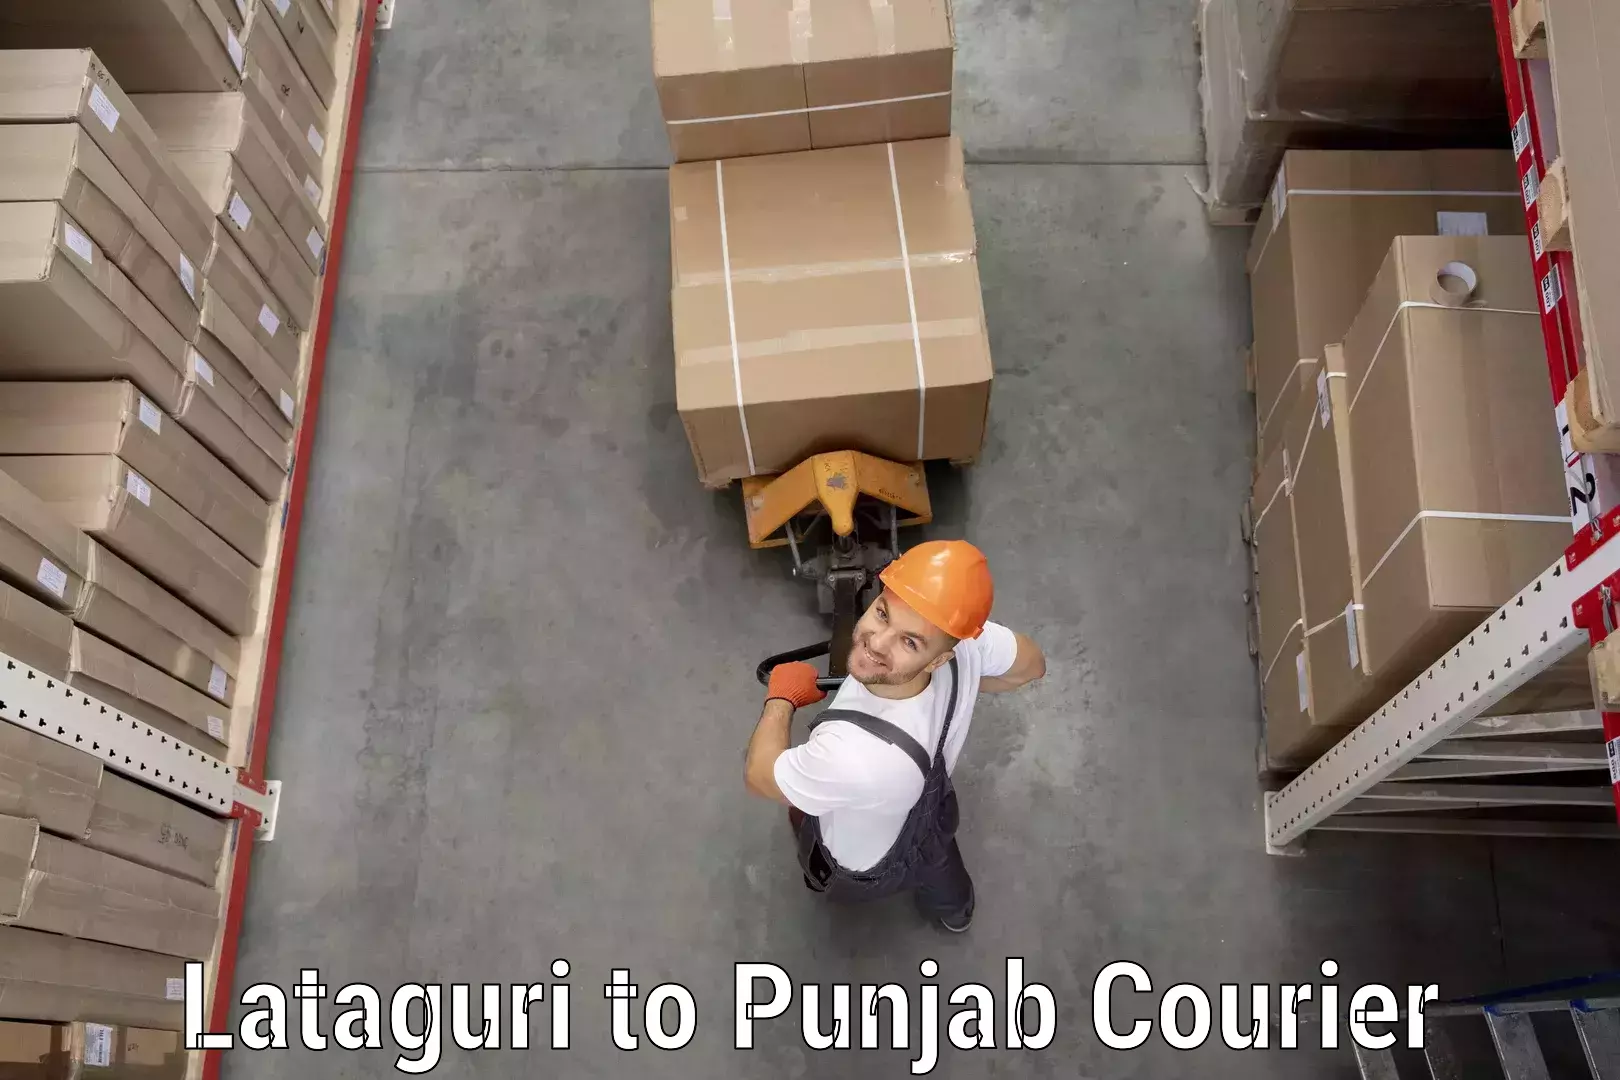 Cash on delivery service Lataguri to Phillaur